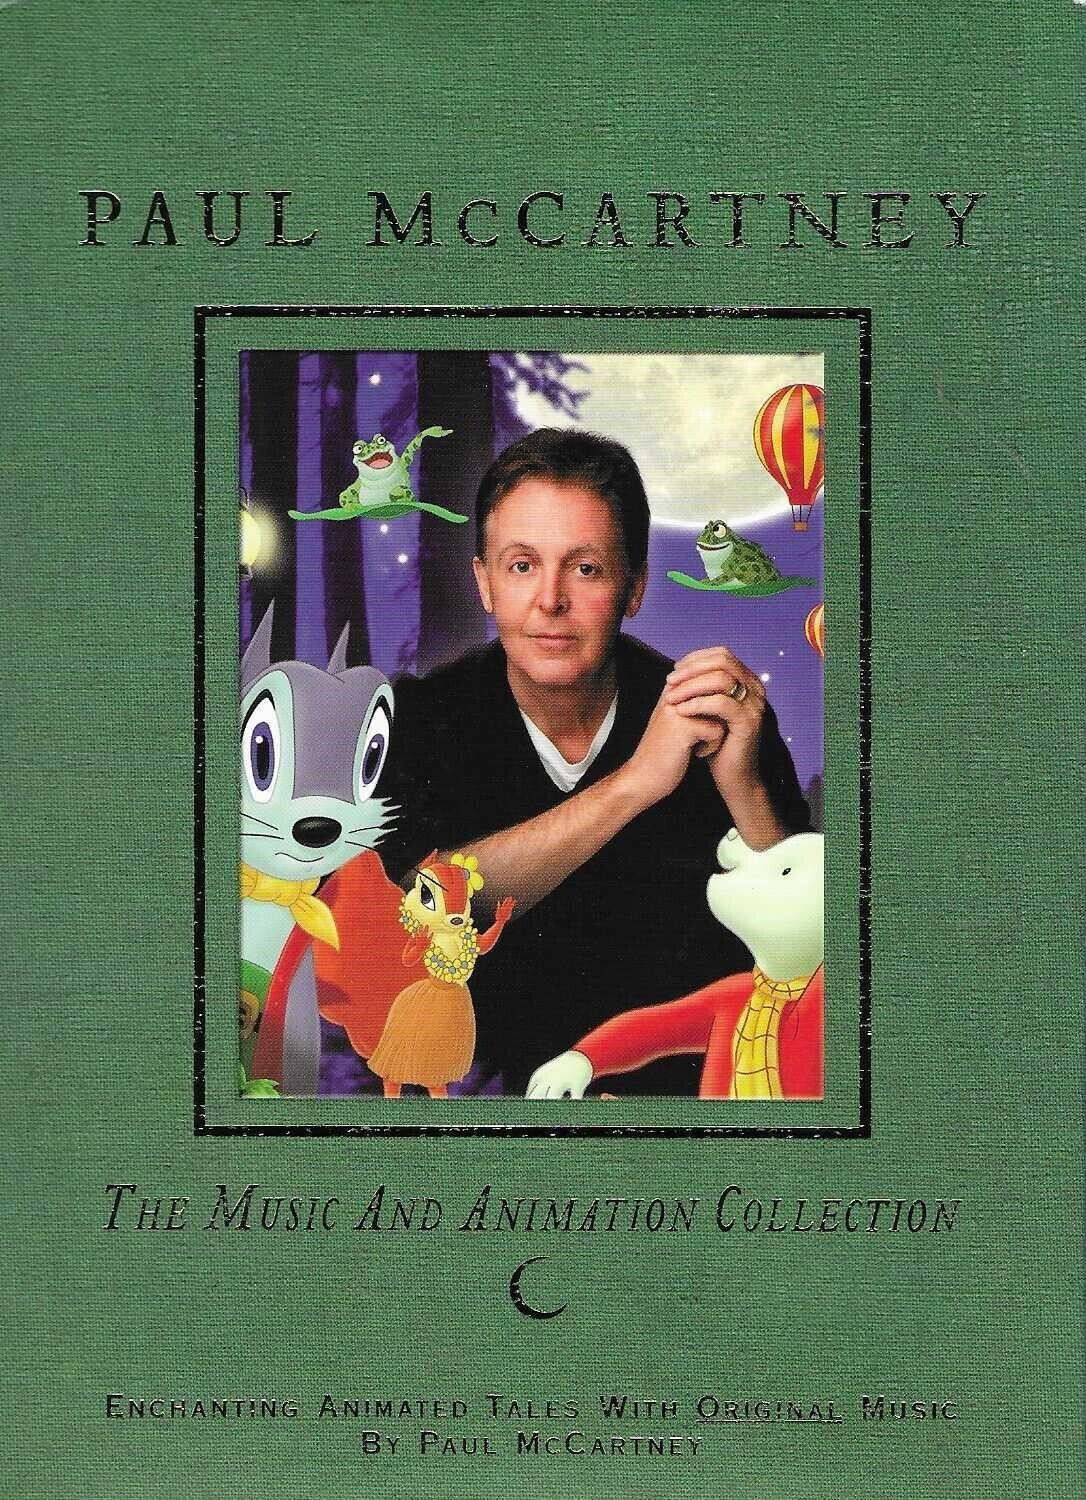 Paul McCartney: The Music And Animation Collection - DVD